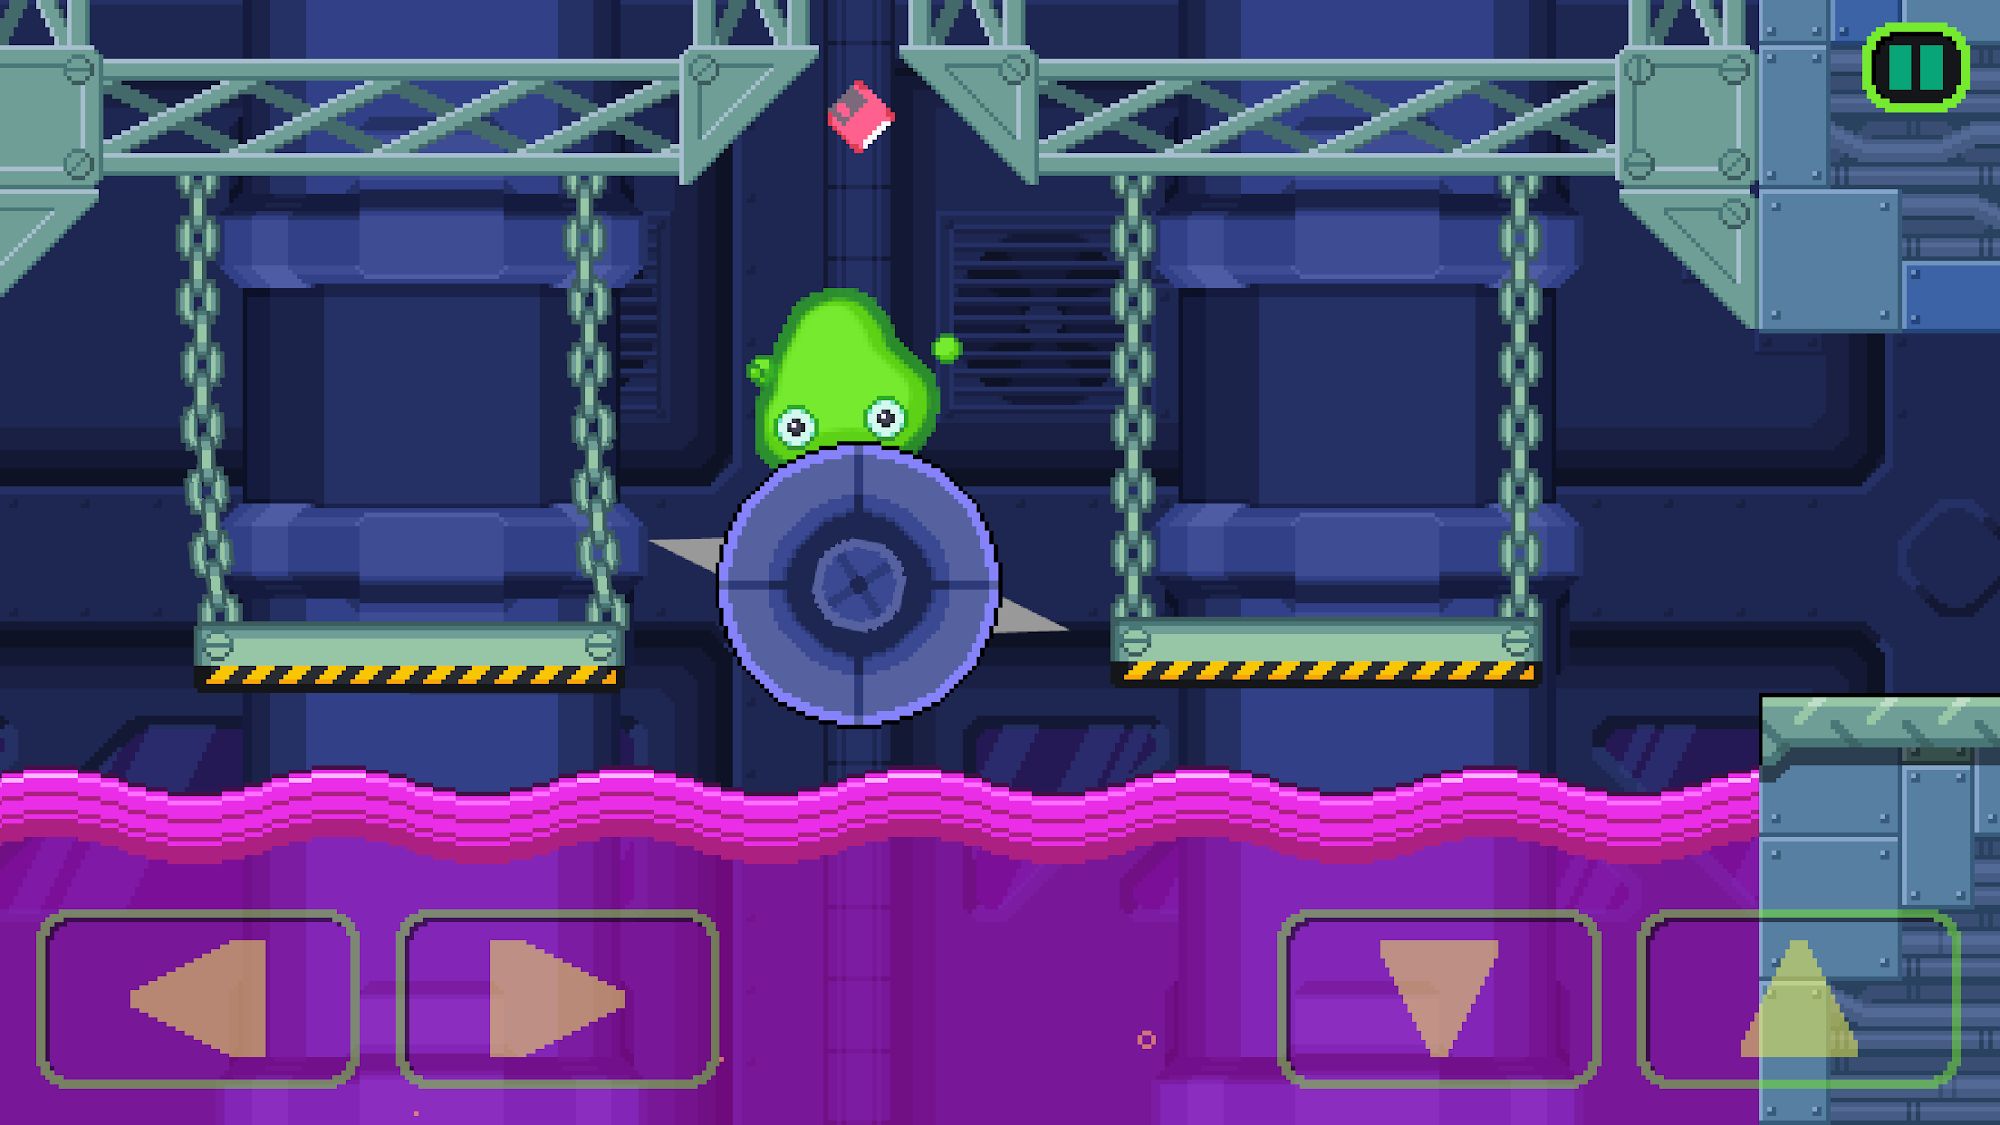 Scarica Slime Labs 2 gratis per Android A.n.d.r.o.i.d. .5...0. .a.n.d. .m.o.r.e.